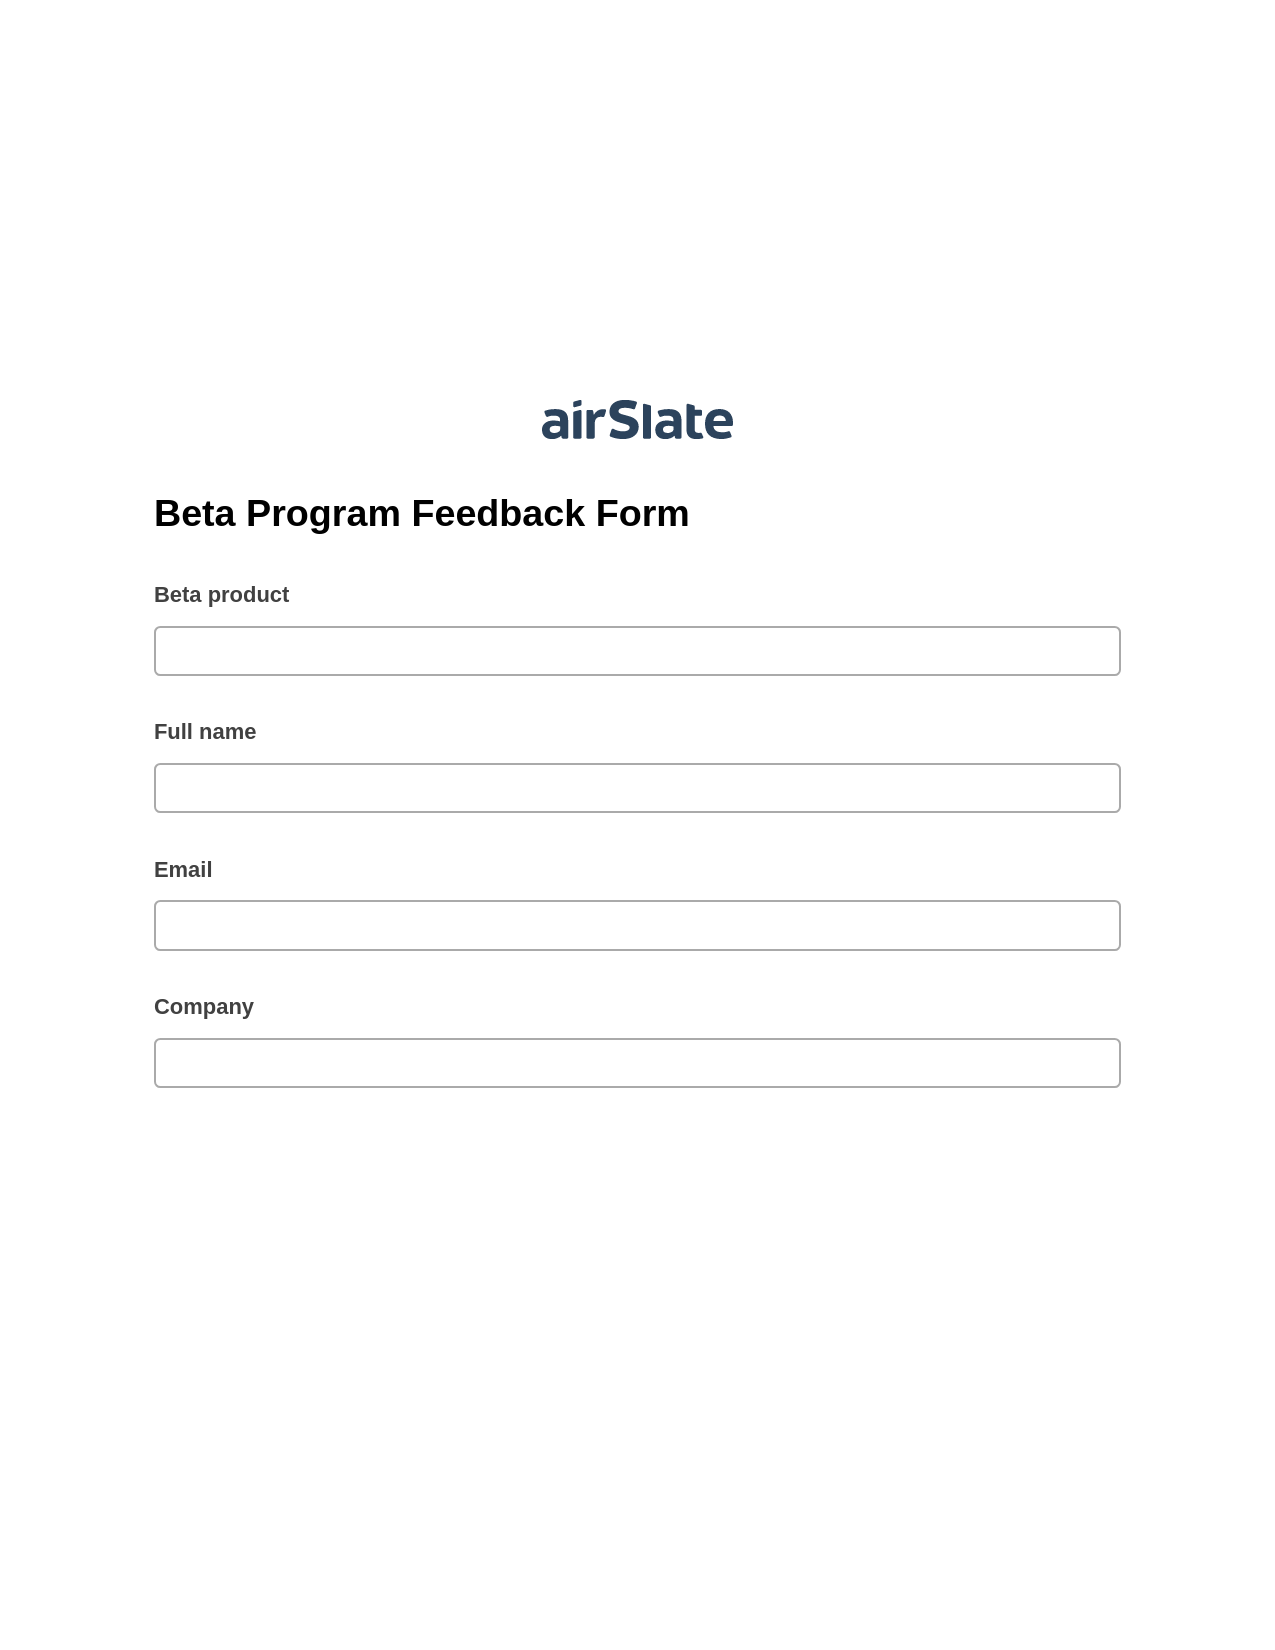 Multirole Beta Program Feedback Form Pre-fill Dropdown from Airtable, Send a Slate with Roles Bot, Export to Formstack Documents Bot